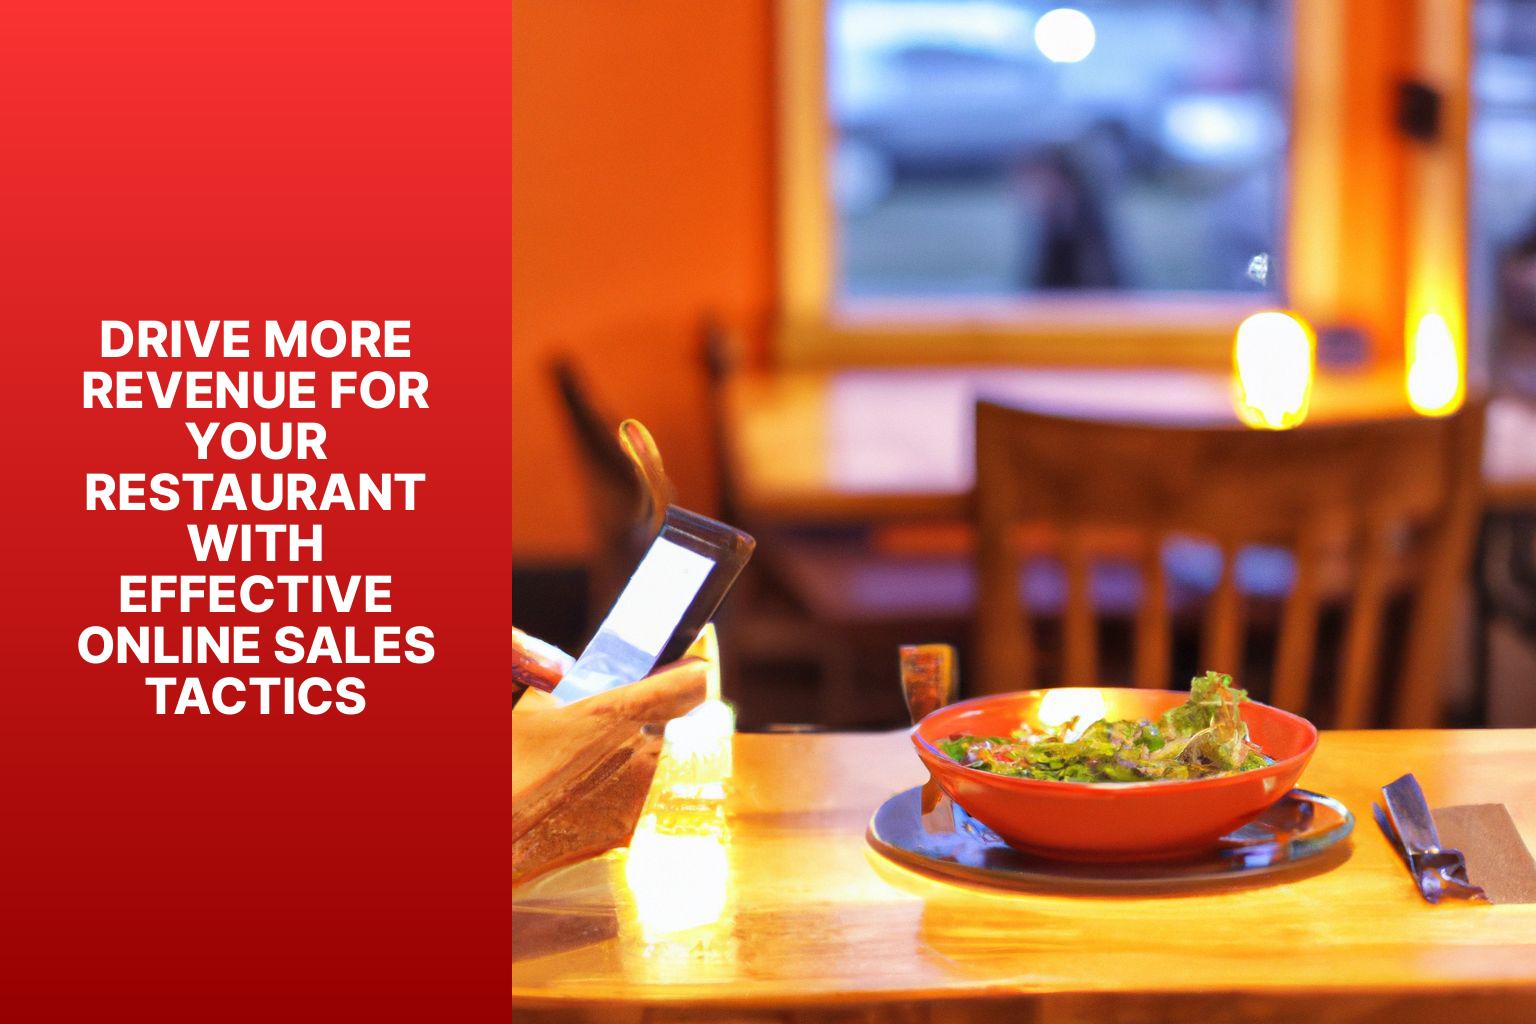 Drive More Revenue for Your Restaurant with Effective Online Sales Tactics